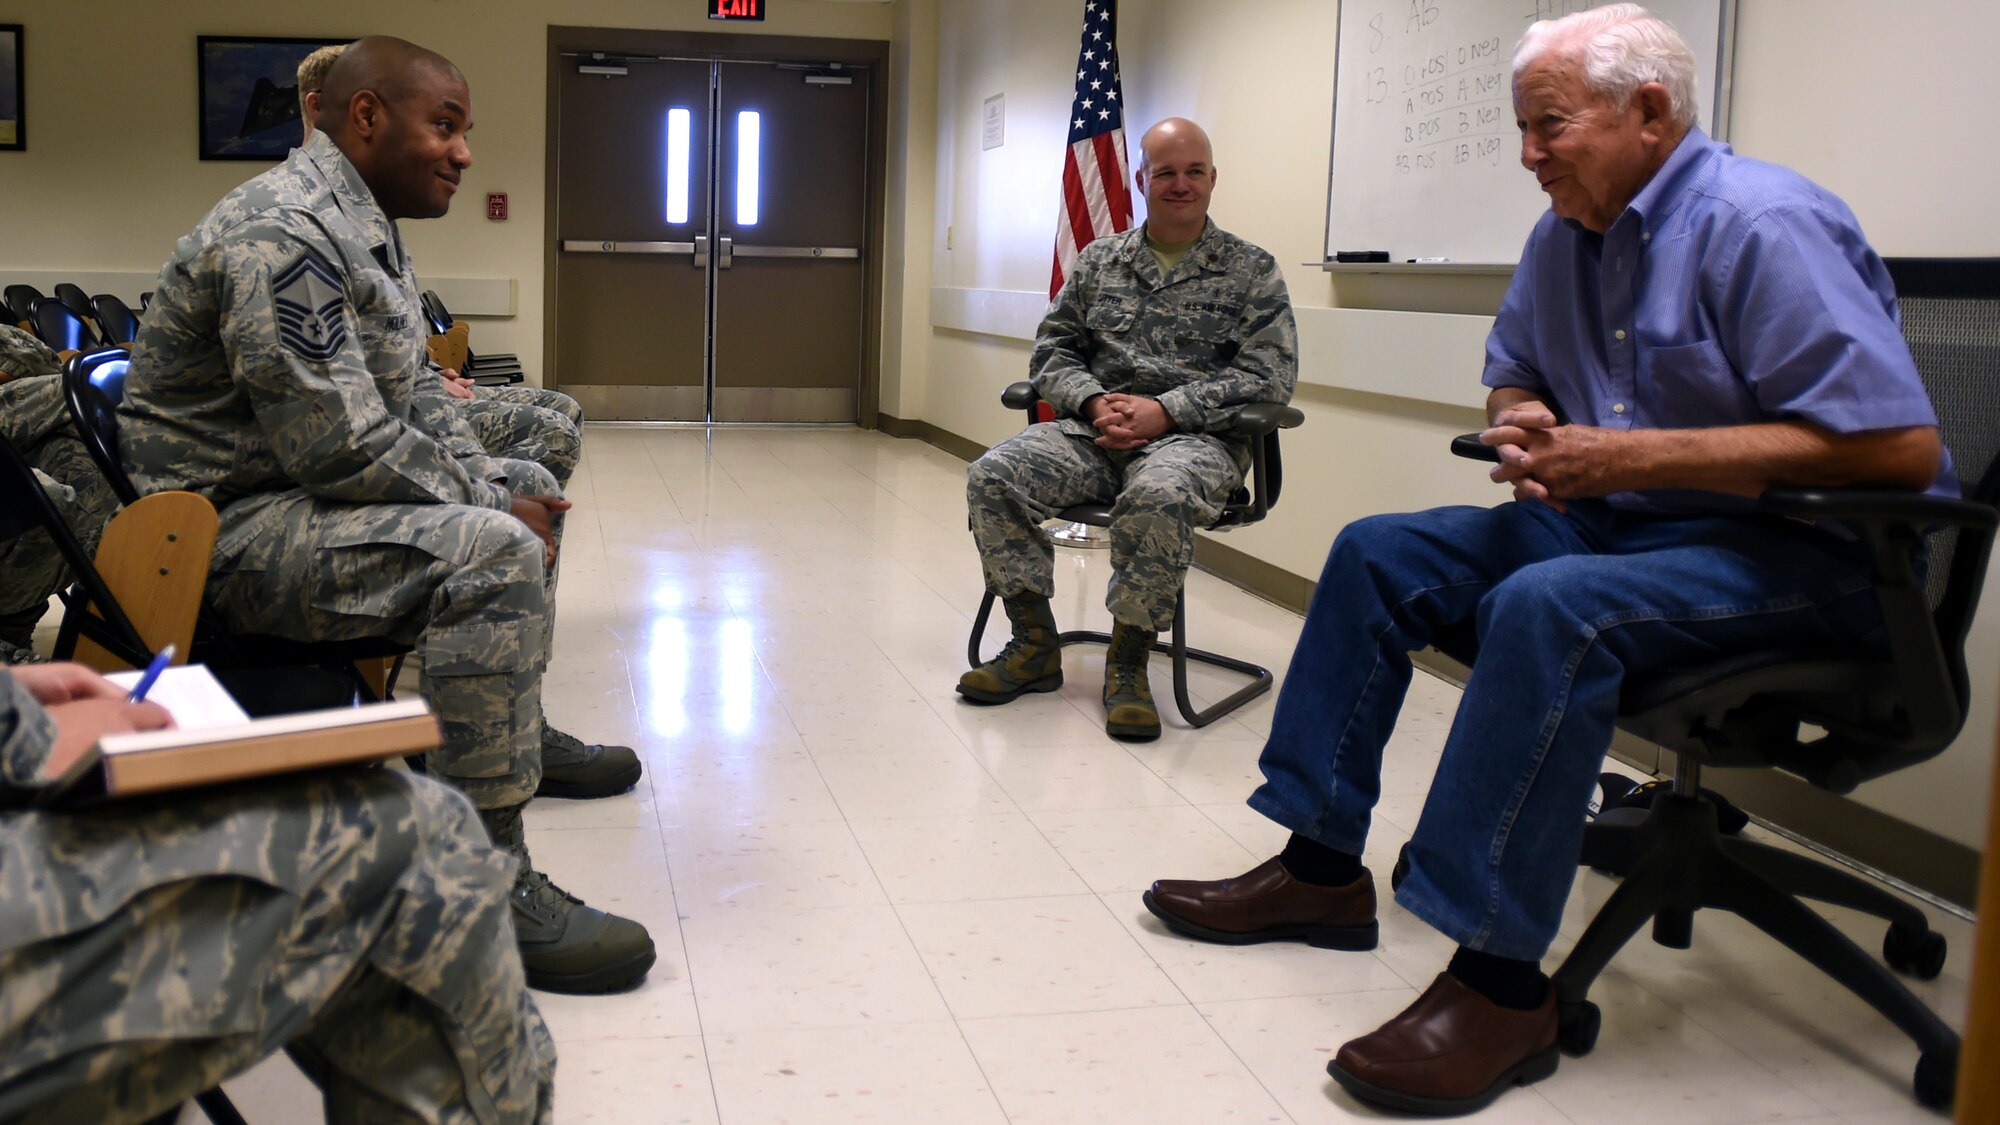 Retired Tech. Sgt. Arnold Parker (right), a Korean War veteran who worked in nutritional medicine on Lackland Air Force Base, Texas, in the early 1950s, speaks with members of the 59th Diagnostis and Therapeutics Squadron during a session of the deliberate development program June 20 at the Armed Services Blood Bank Center, Joint Base San Antonio-Lackland, Texas. The program develops Airmen of all ranks in areas, which include leadership, management and self-improvement. It encourages networking and access to other members of the medical team. (U.S. Air Force photo/Staff Sgt. Kevin Iinuma)